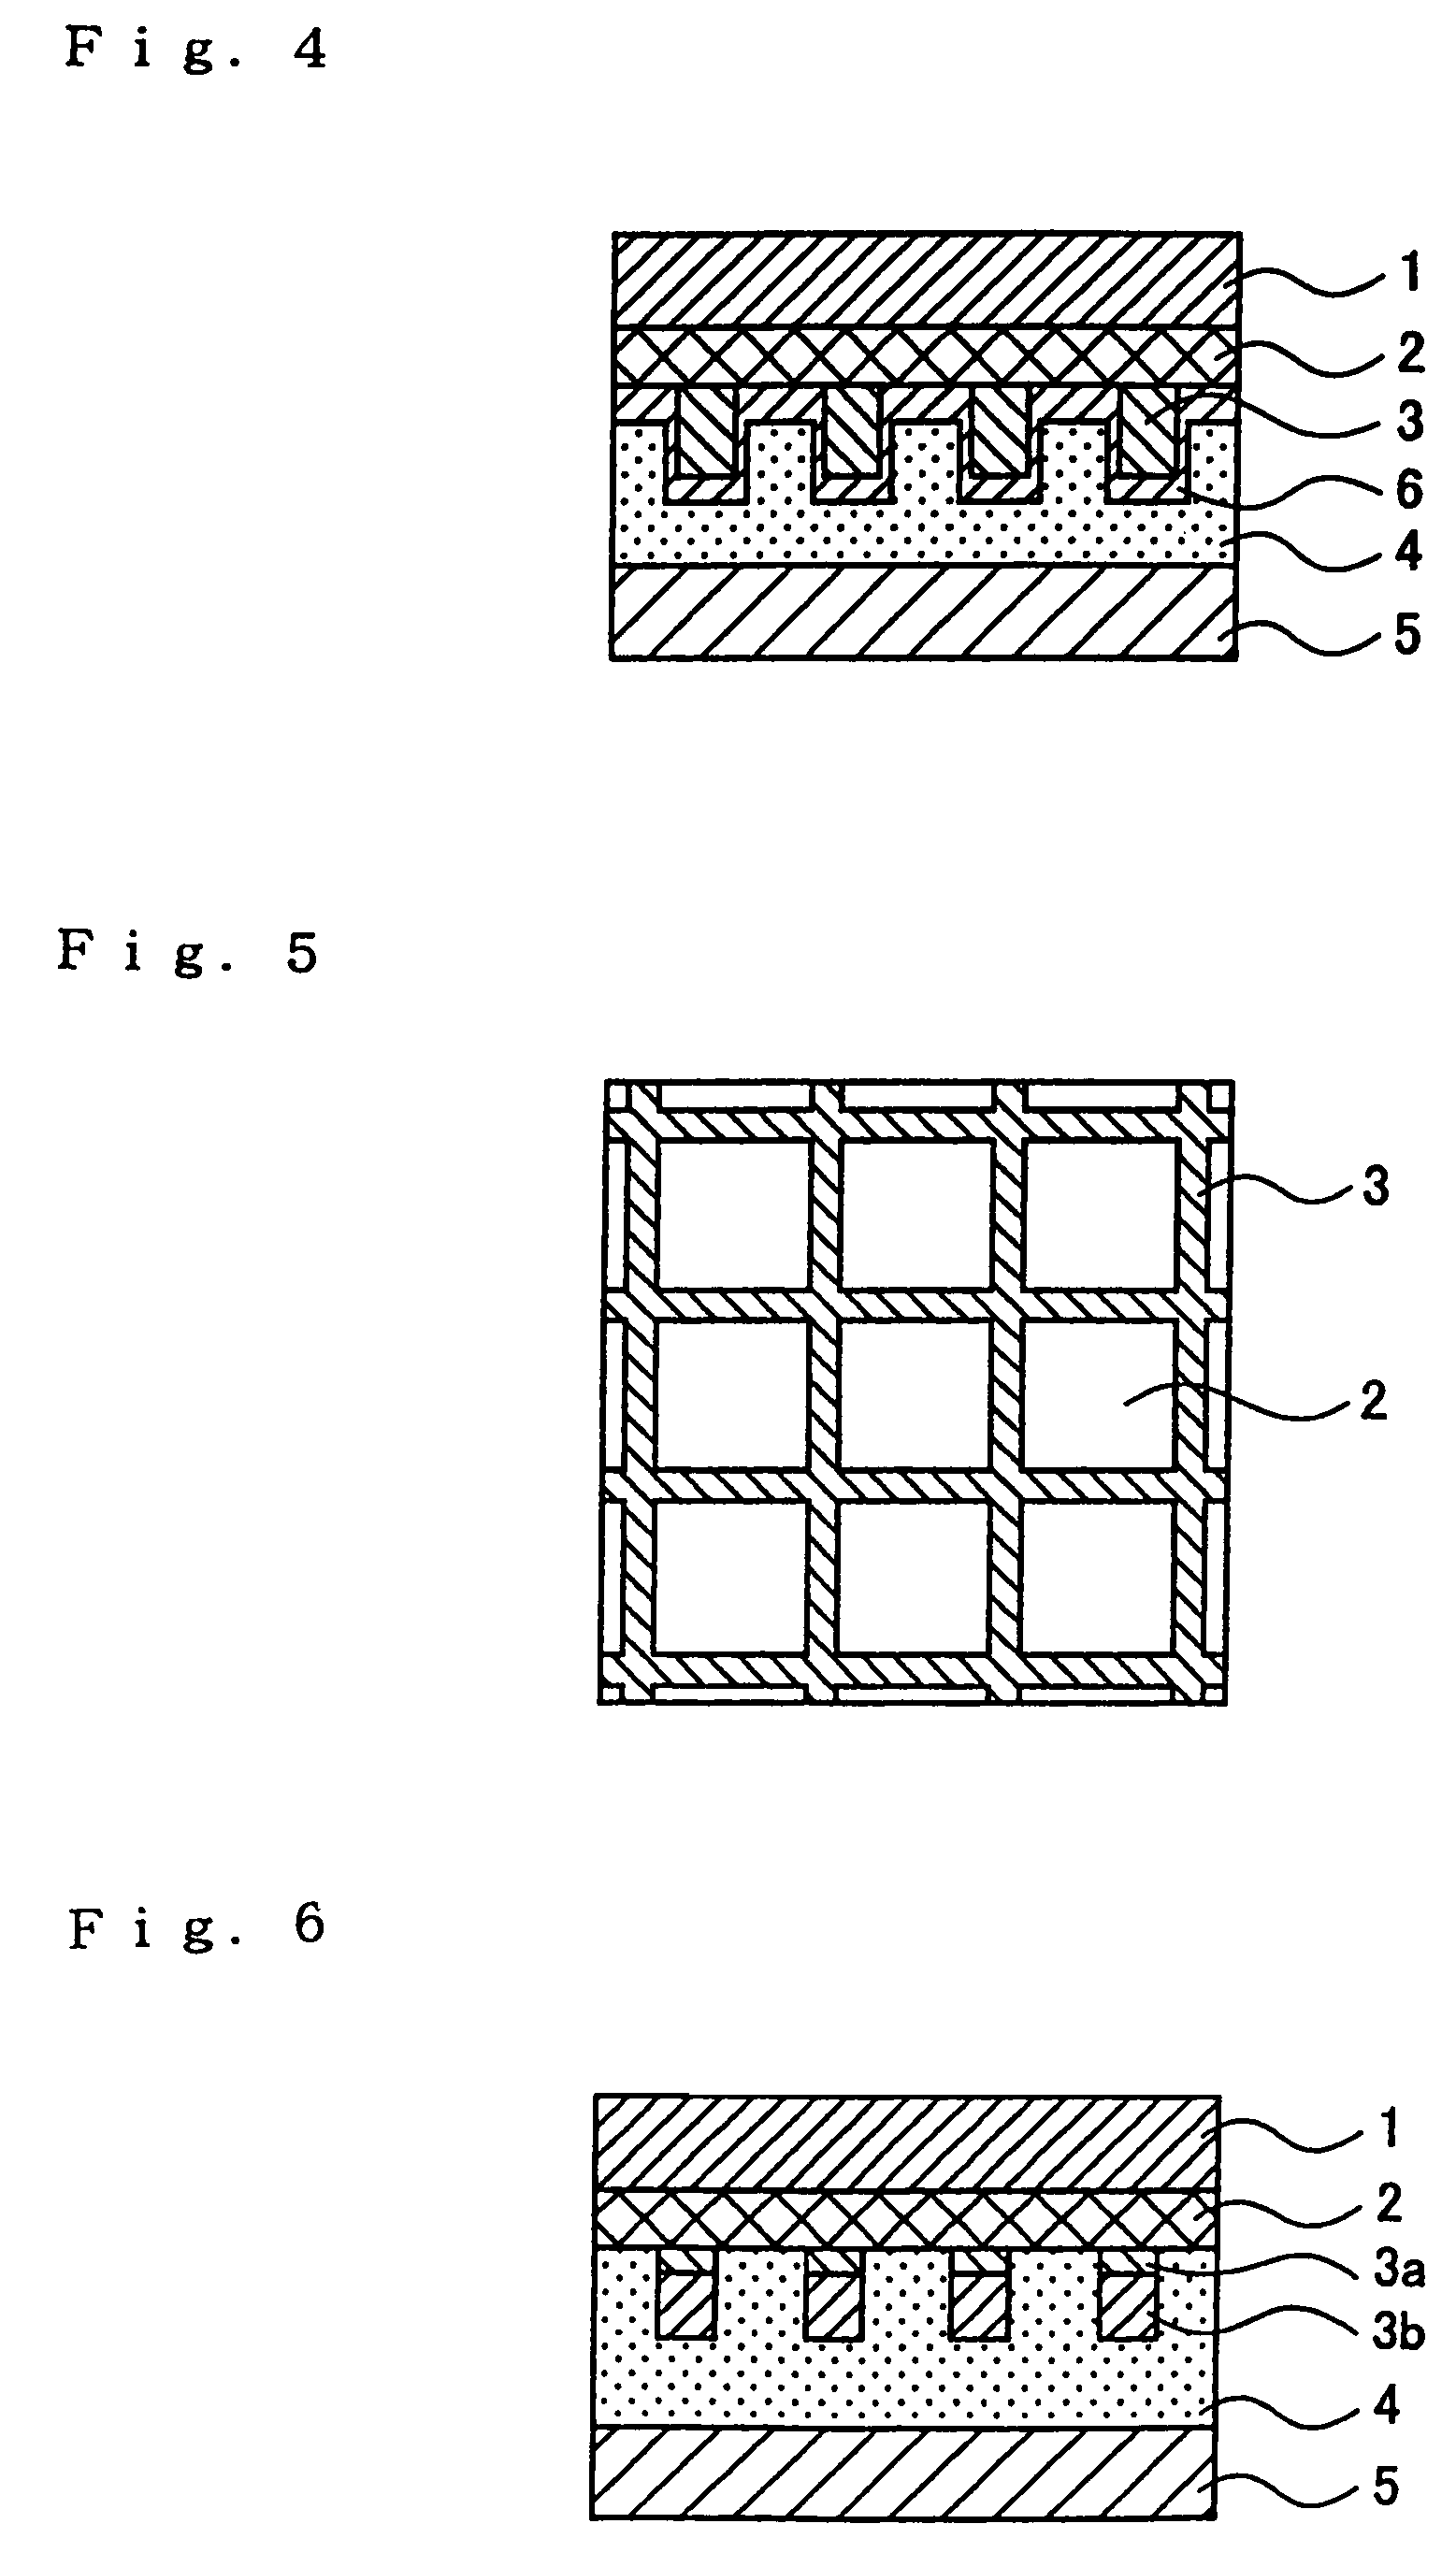 Transparent conductive multi-layer structure, process for its manufacture and device making use of transparent conductive multi-layer structure